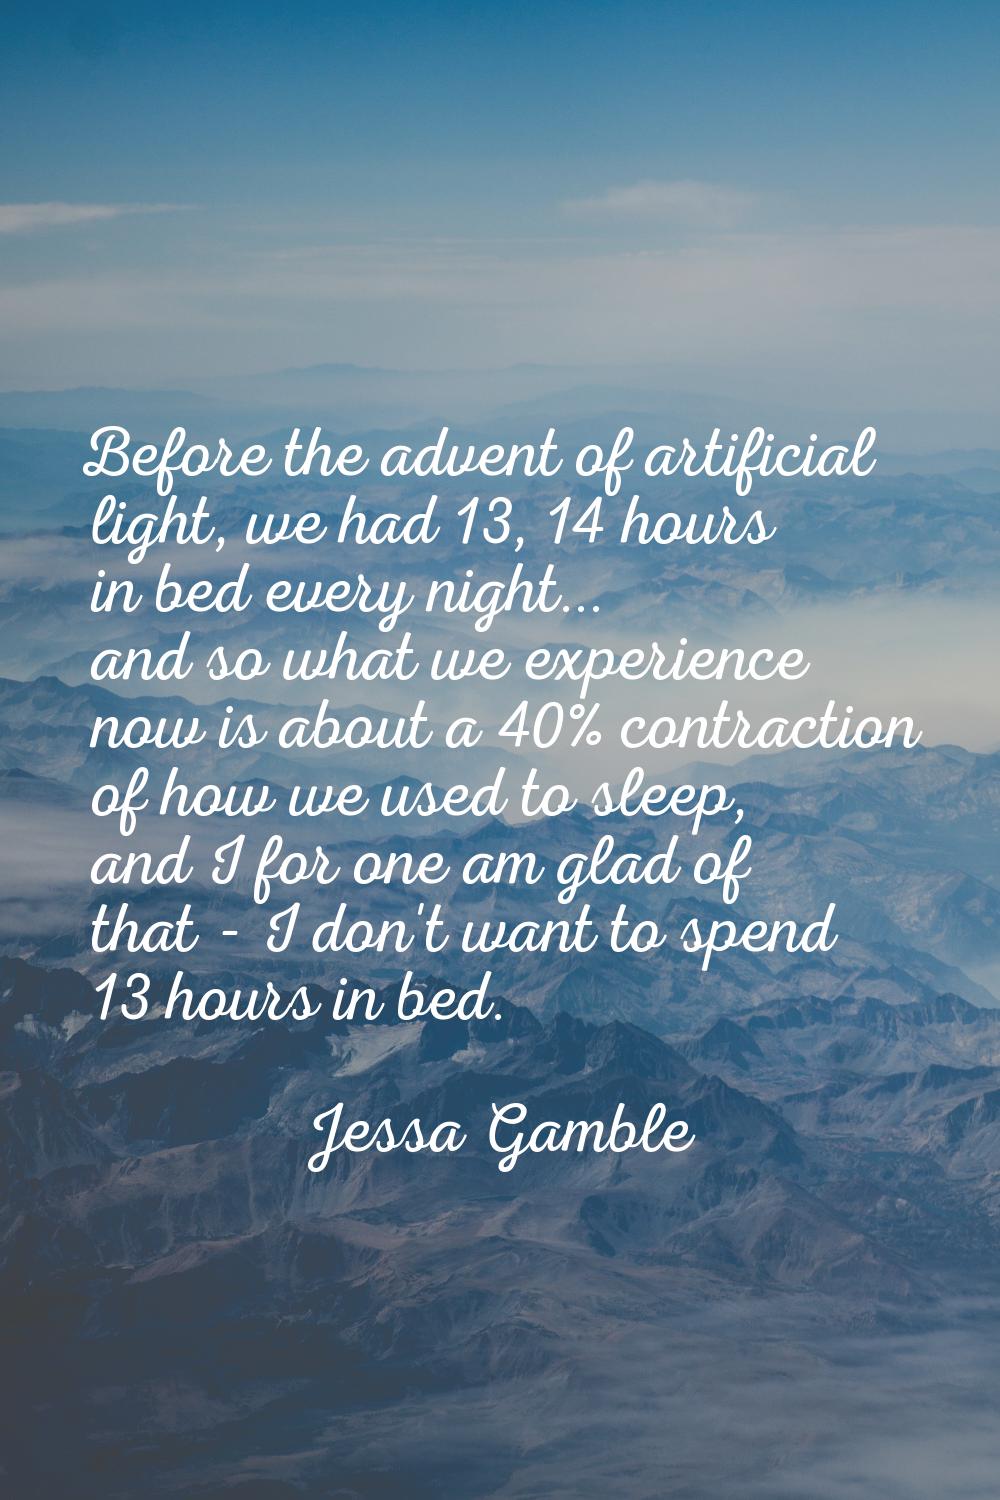 Before the advent of artificial light, we had 13, 14 hours in bed every night... and so what we exp